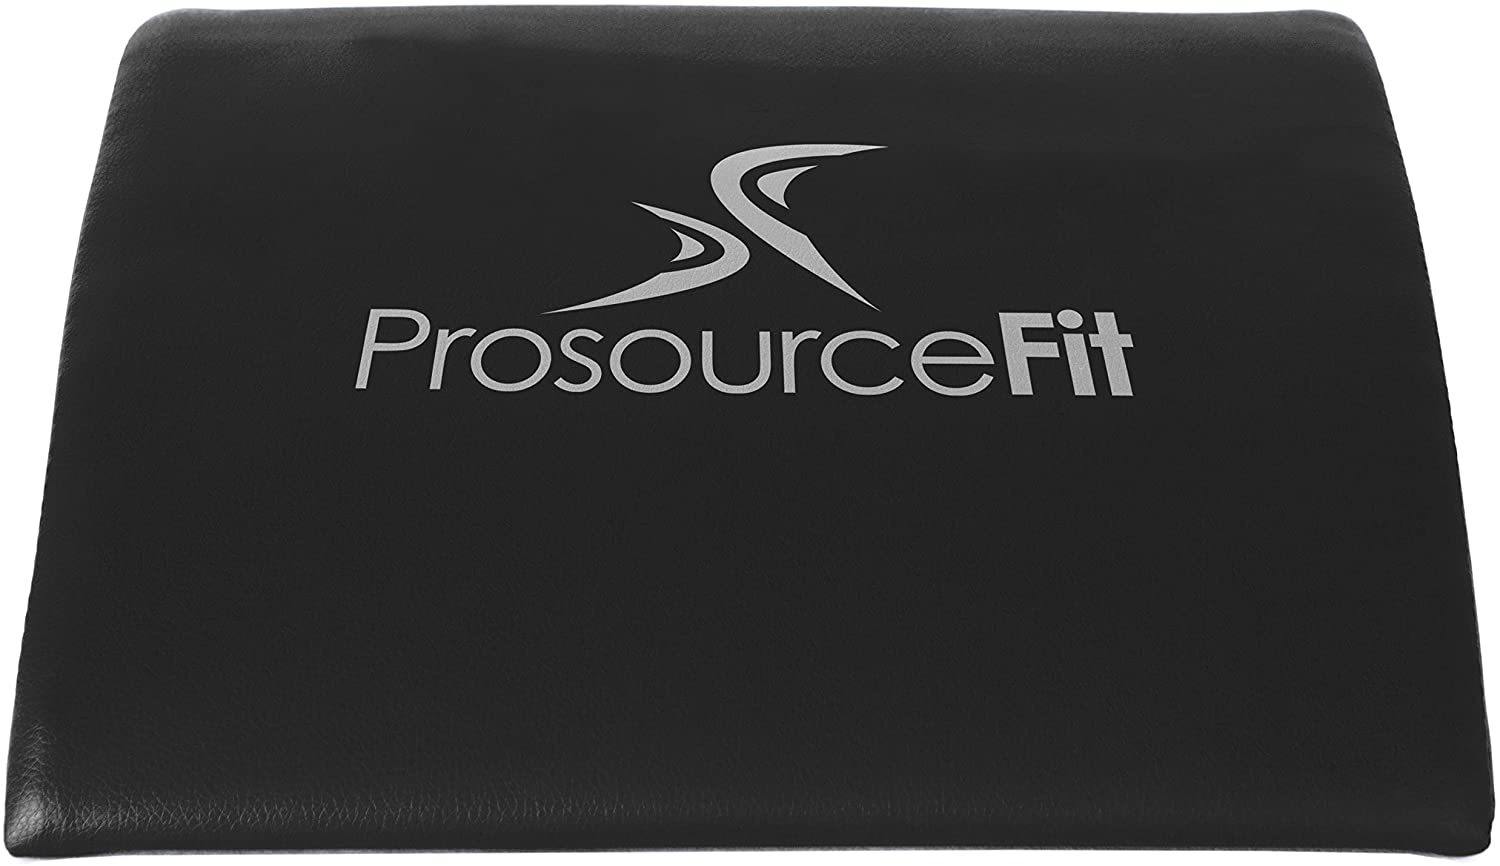 Large Exercise Mat 7mm Thick. Includes A Storage Bag and Straps